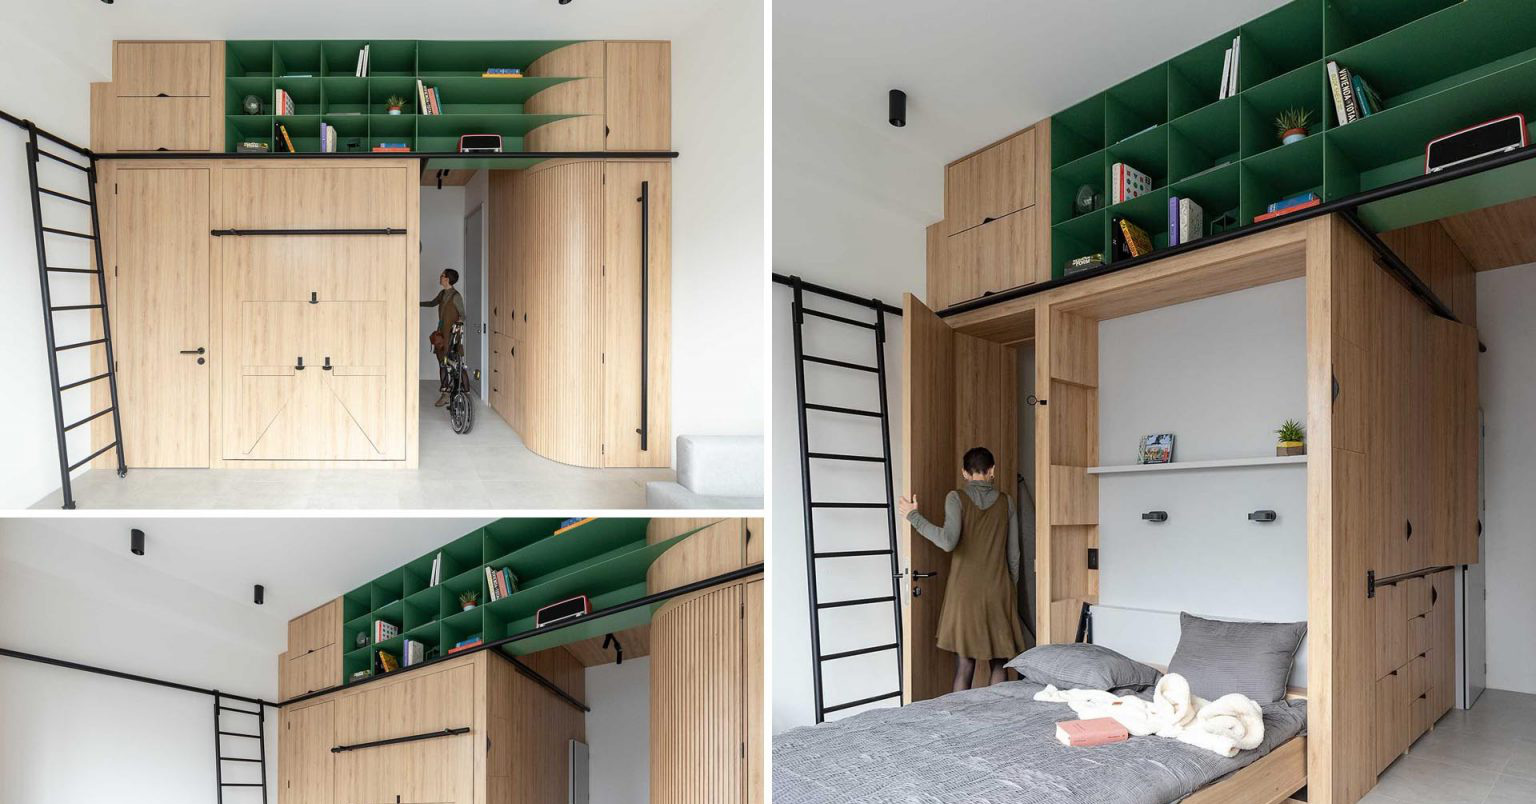 The design of the wardrobe helps to make the most of the space in the small apartment